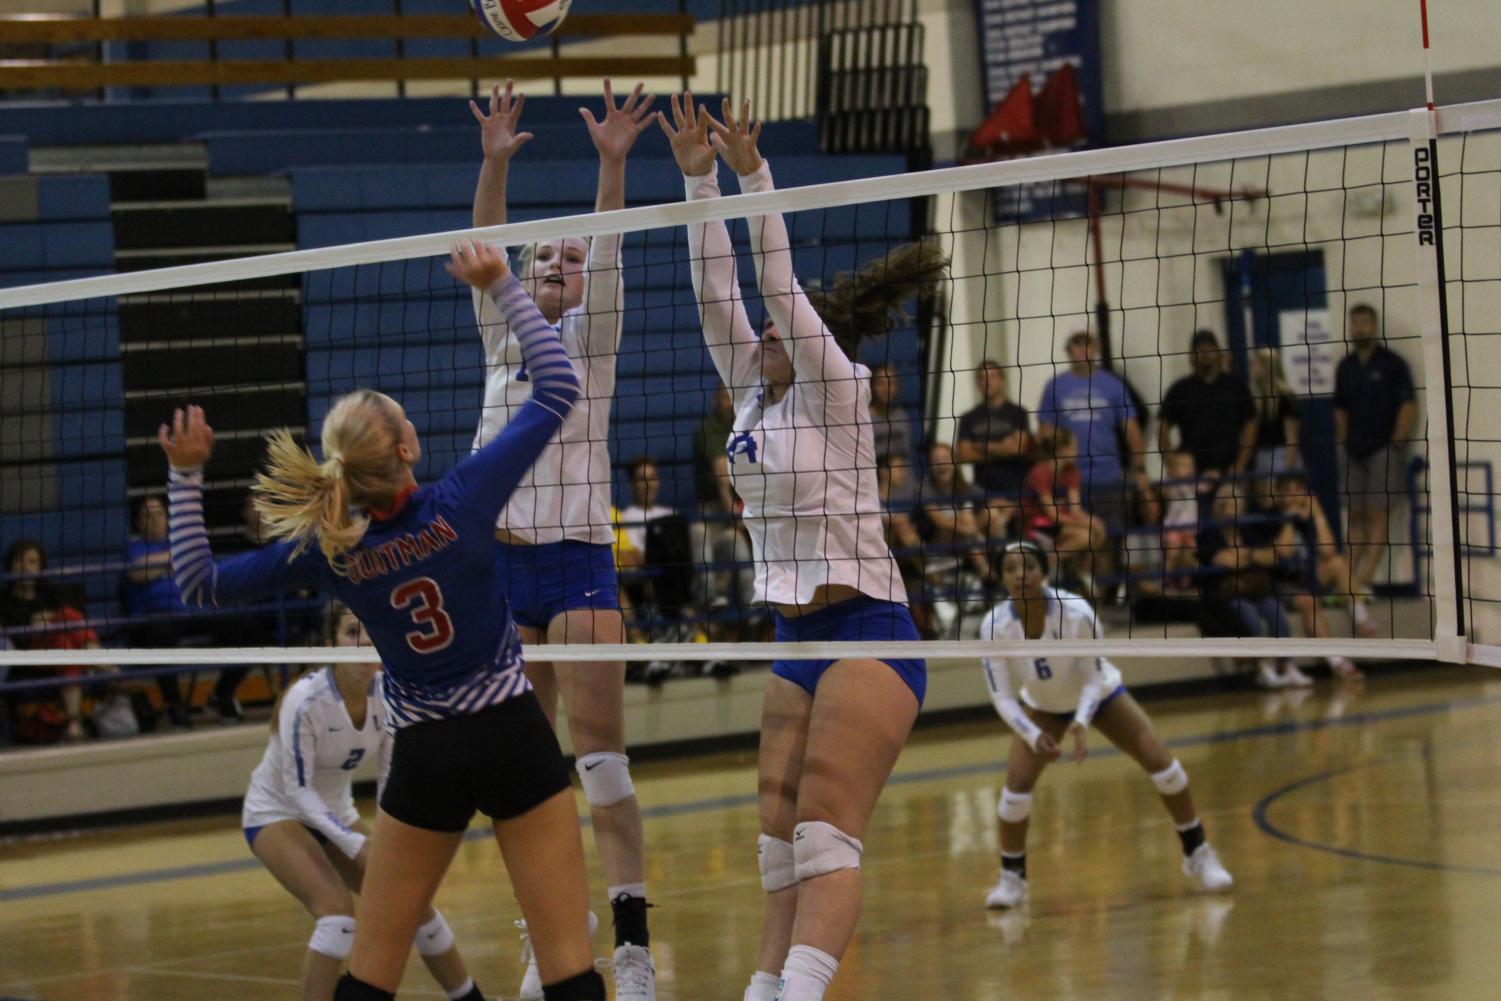 Two Lindale players jump up to block a spike. All three teams beat Gilmer in the non-district game.